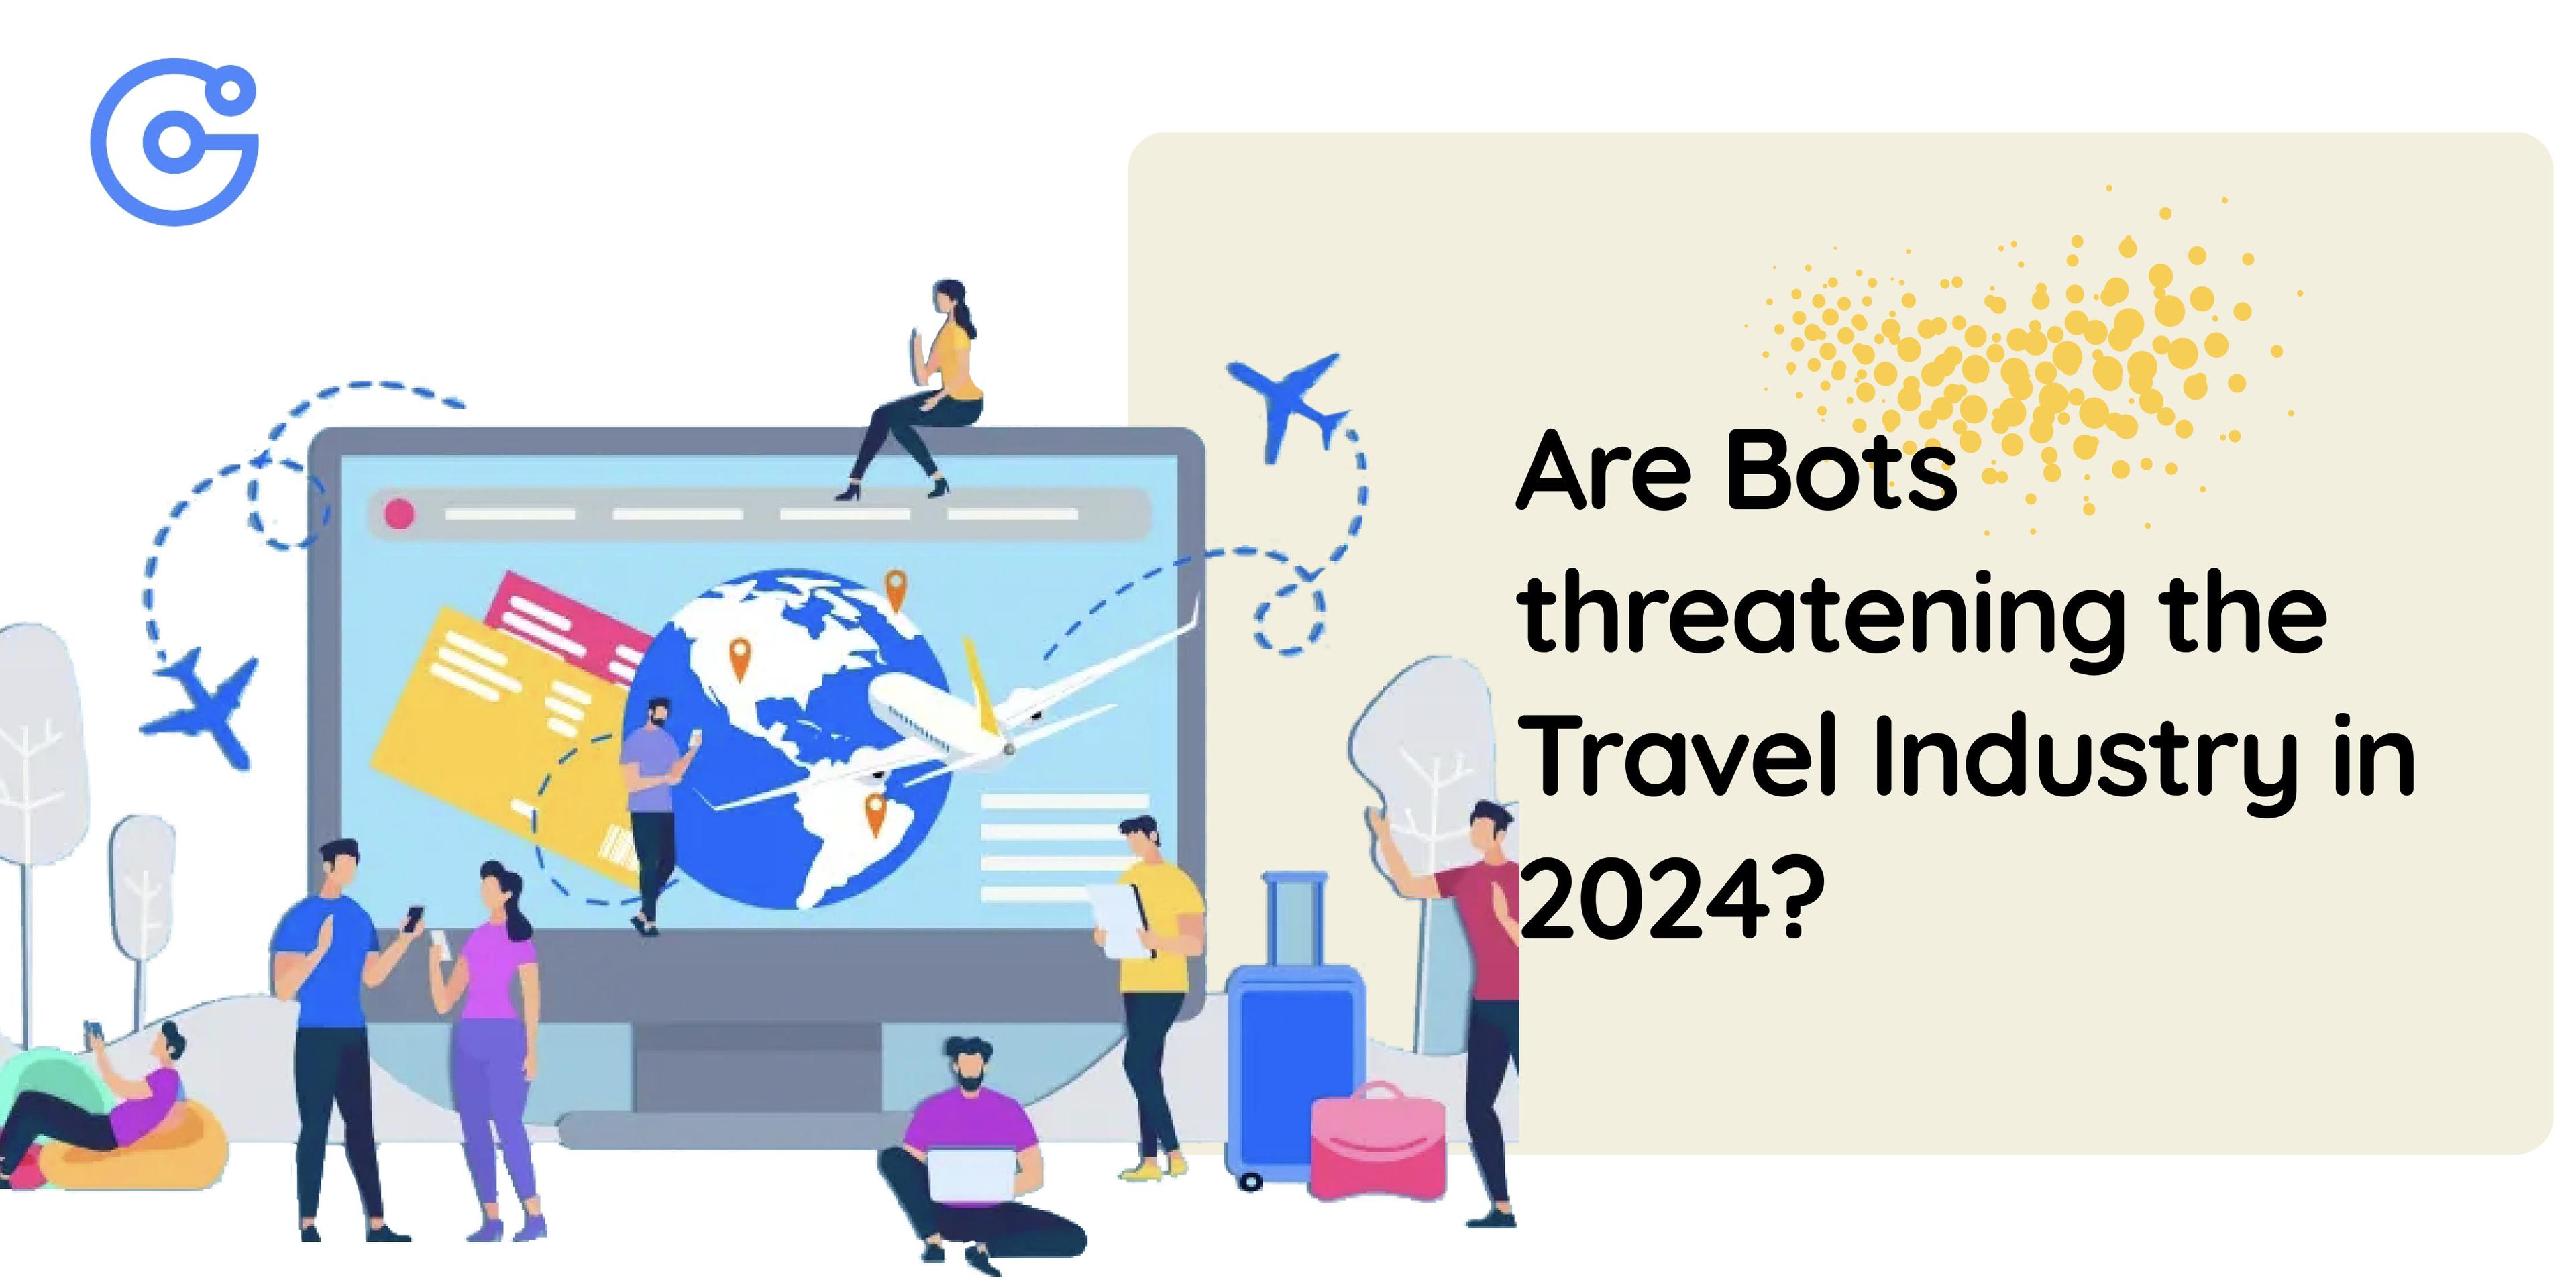 During holiday travel peaks, transportation modes such as airplanes, trains, and buses are likely to face security risks like web crawlers, script-based ticket snatching, and SMS fraud.